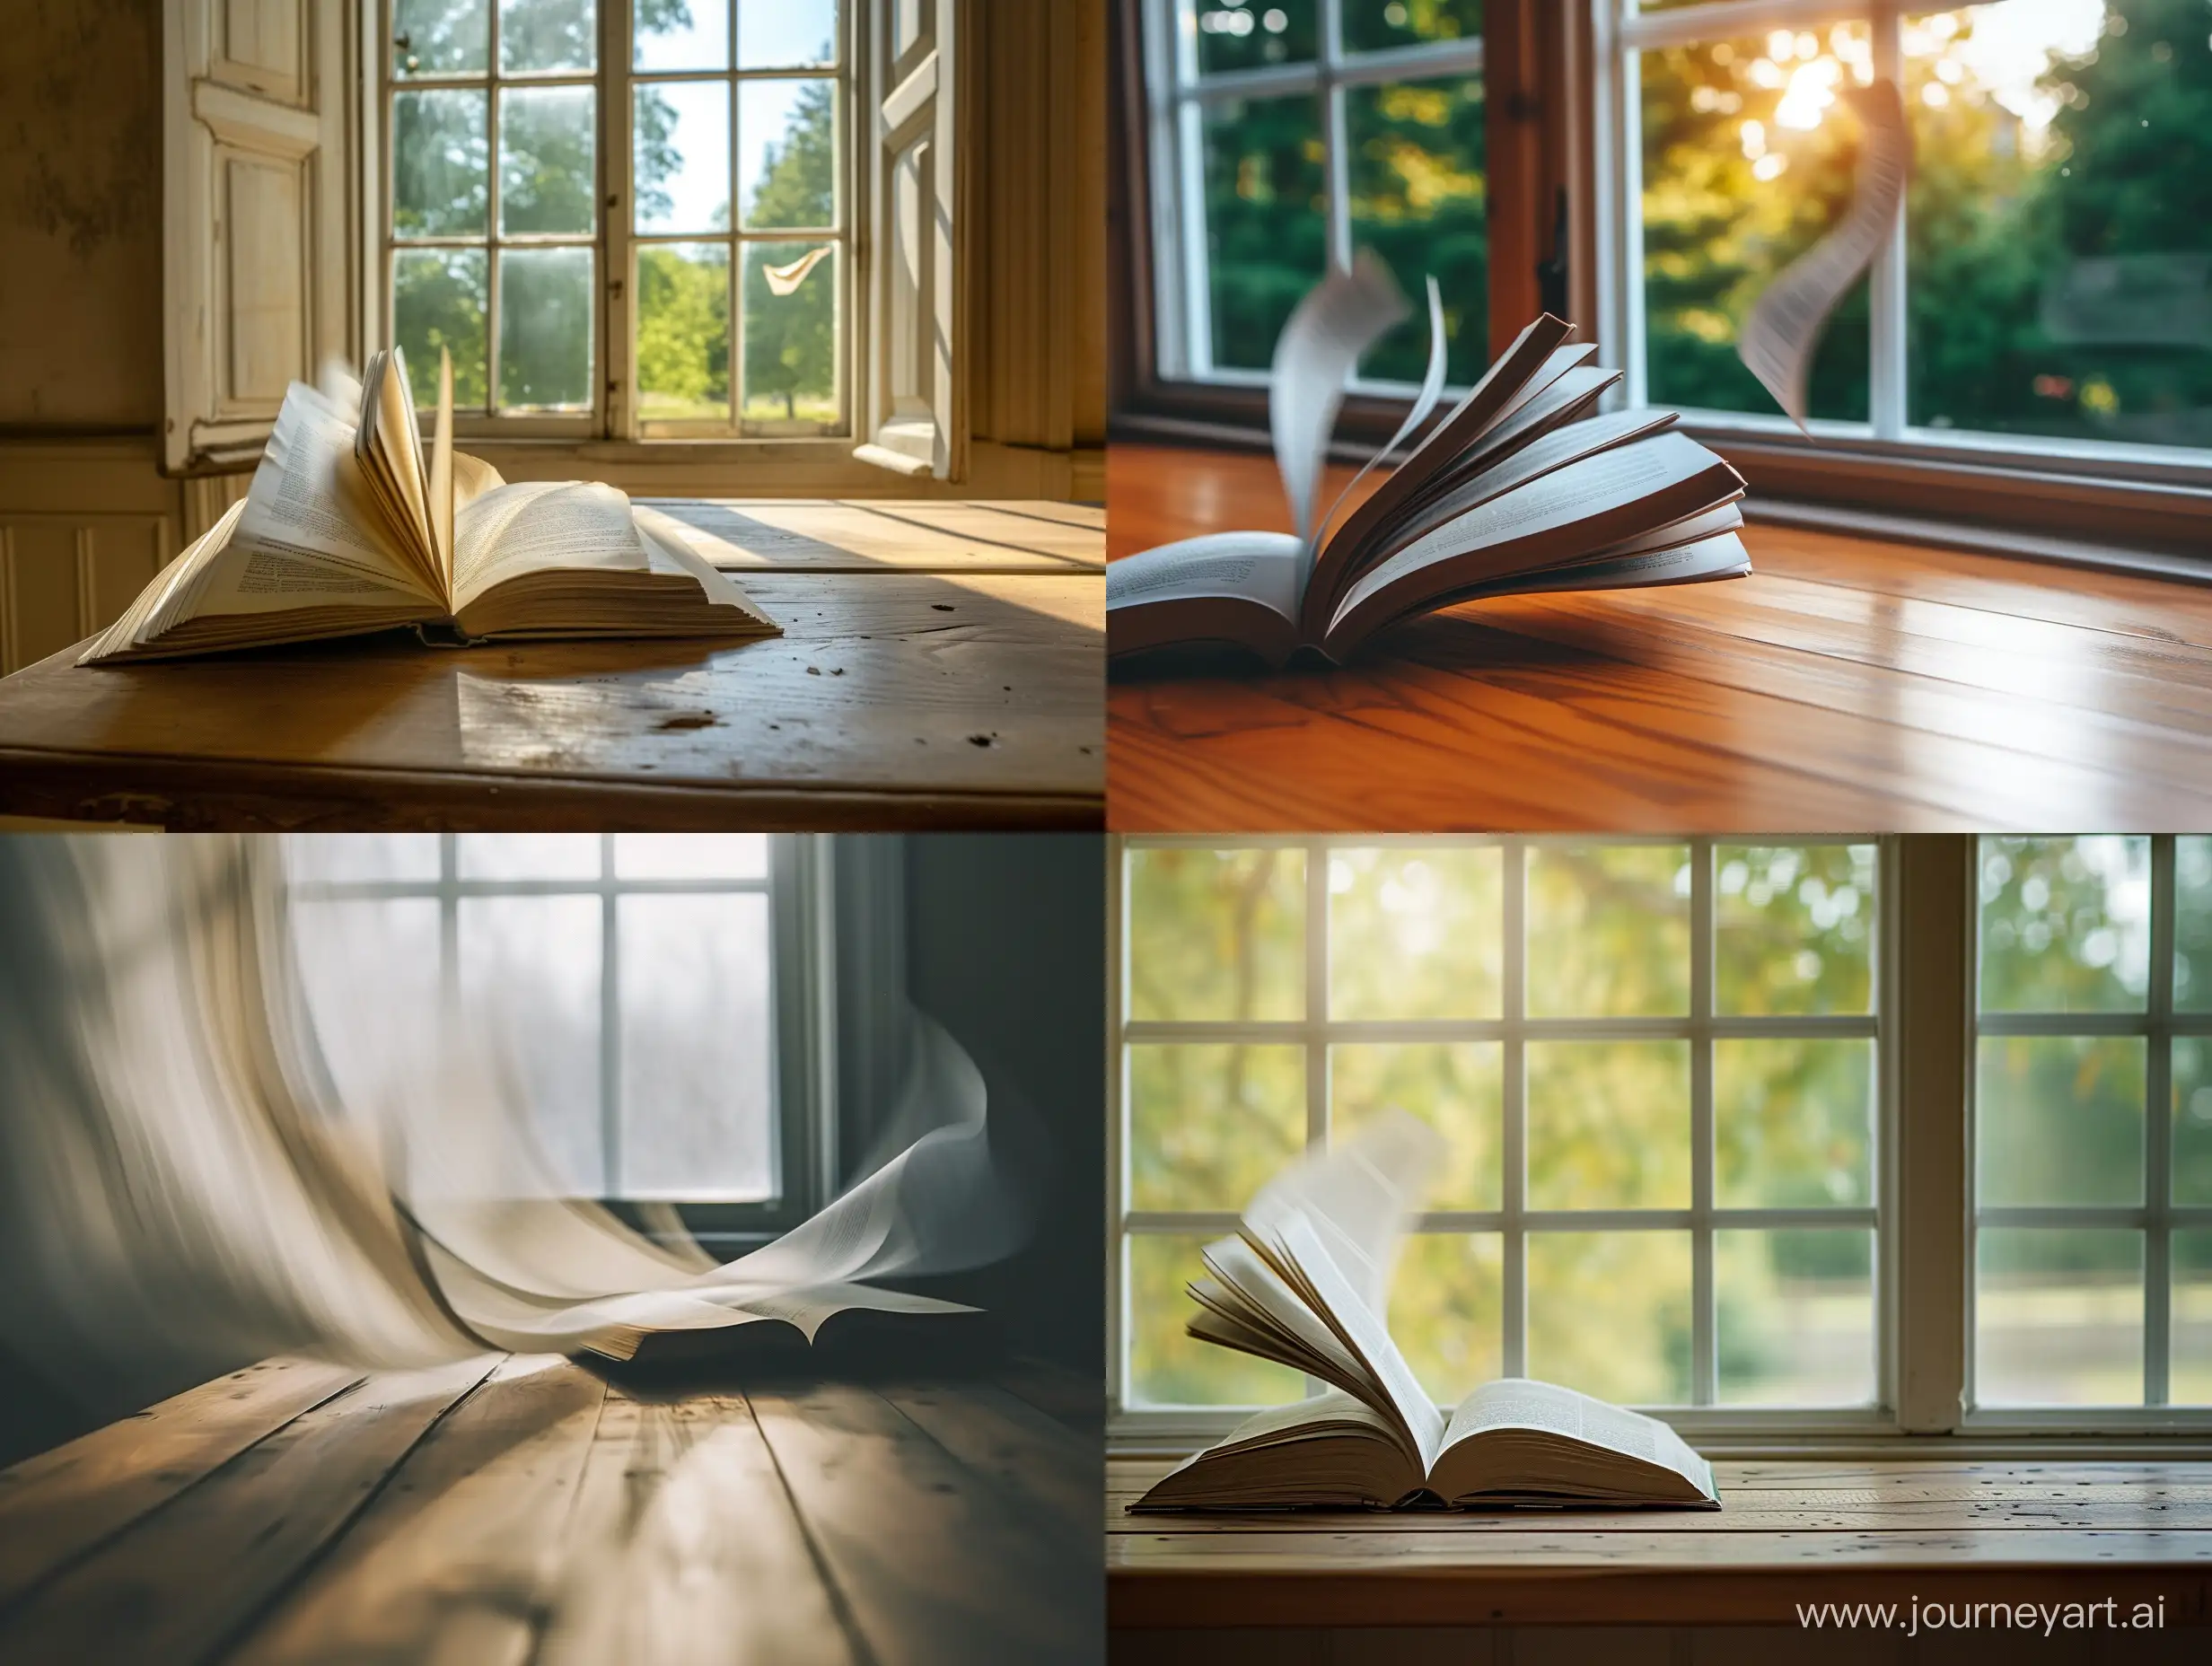 Turning-Pages-on-Wooden-Table-Windy-Window-Scene